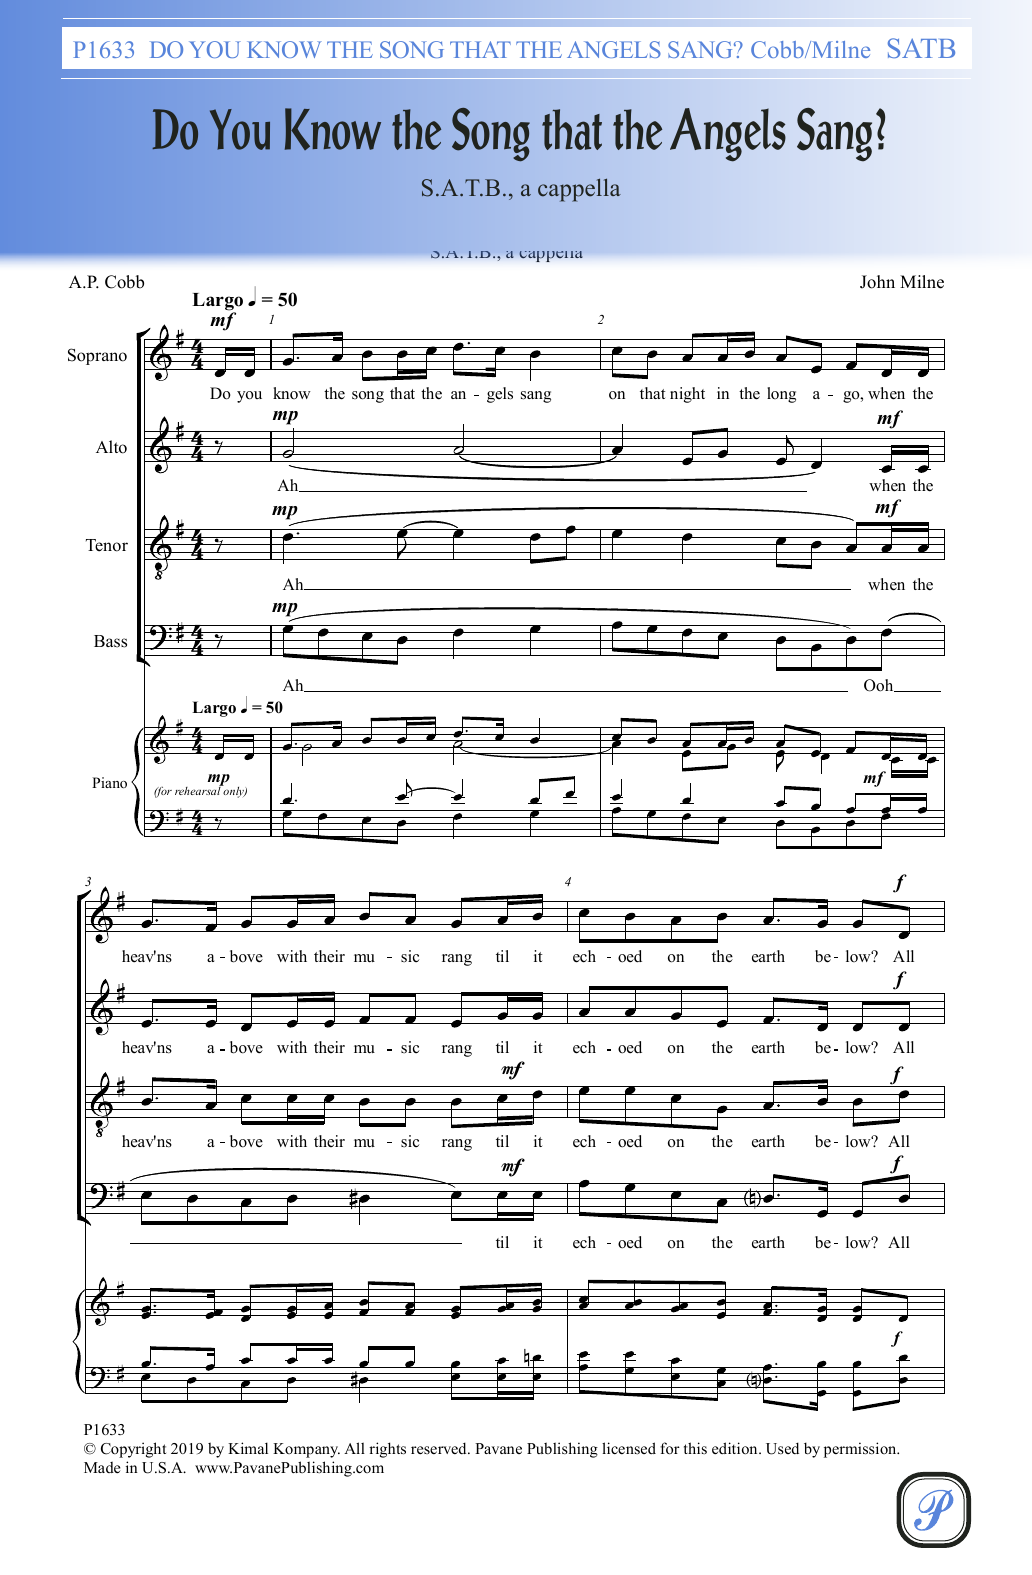 Download A.P. Cobb and John Milne Do You Know The Song That The Angels Sa Sheet Music